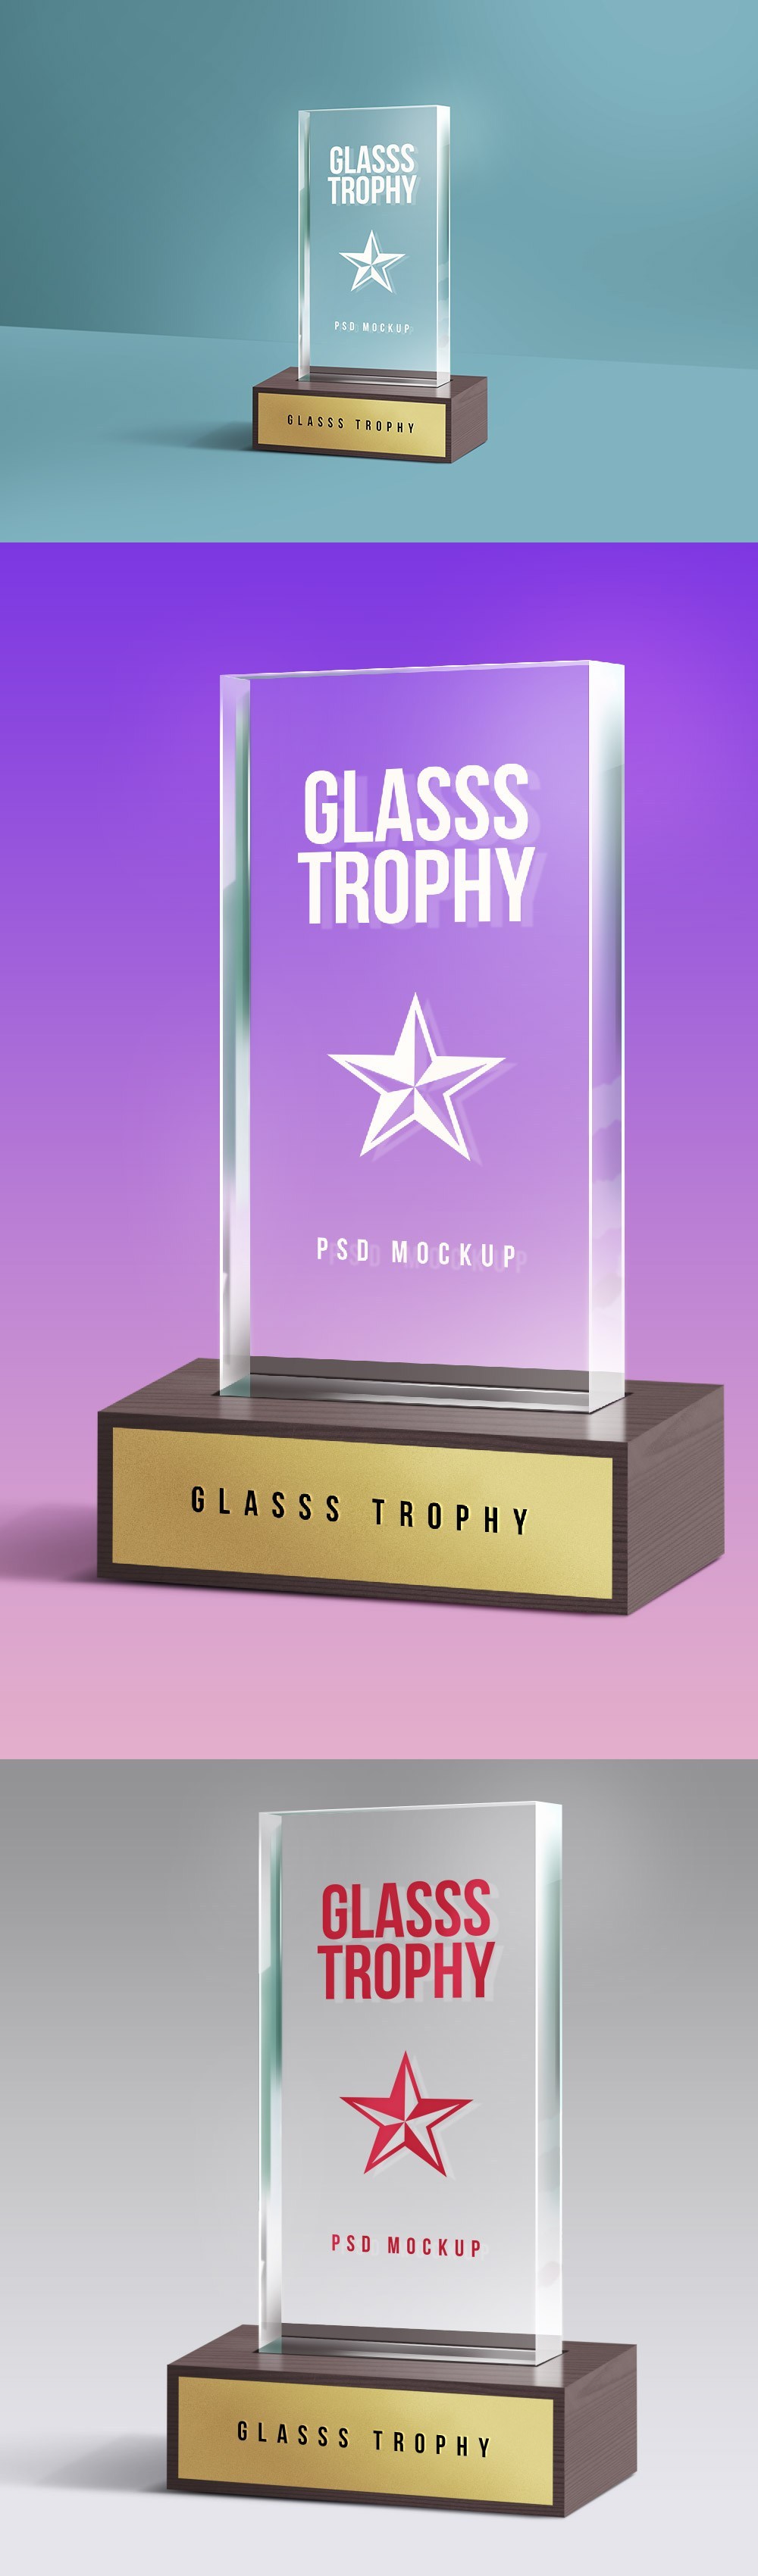 Free Acrylic Memento and Glass Trophy PSD Mock-up   